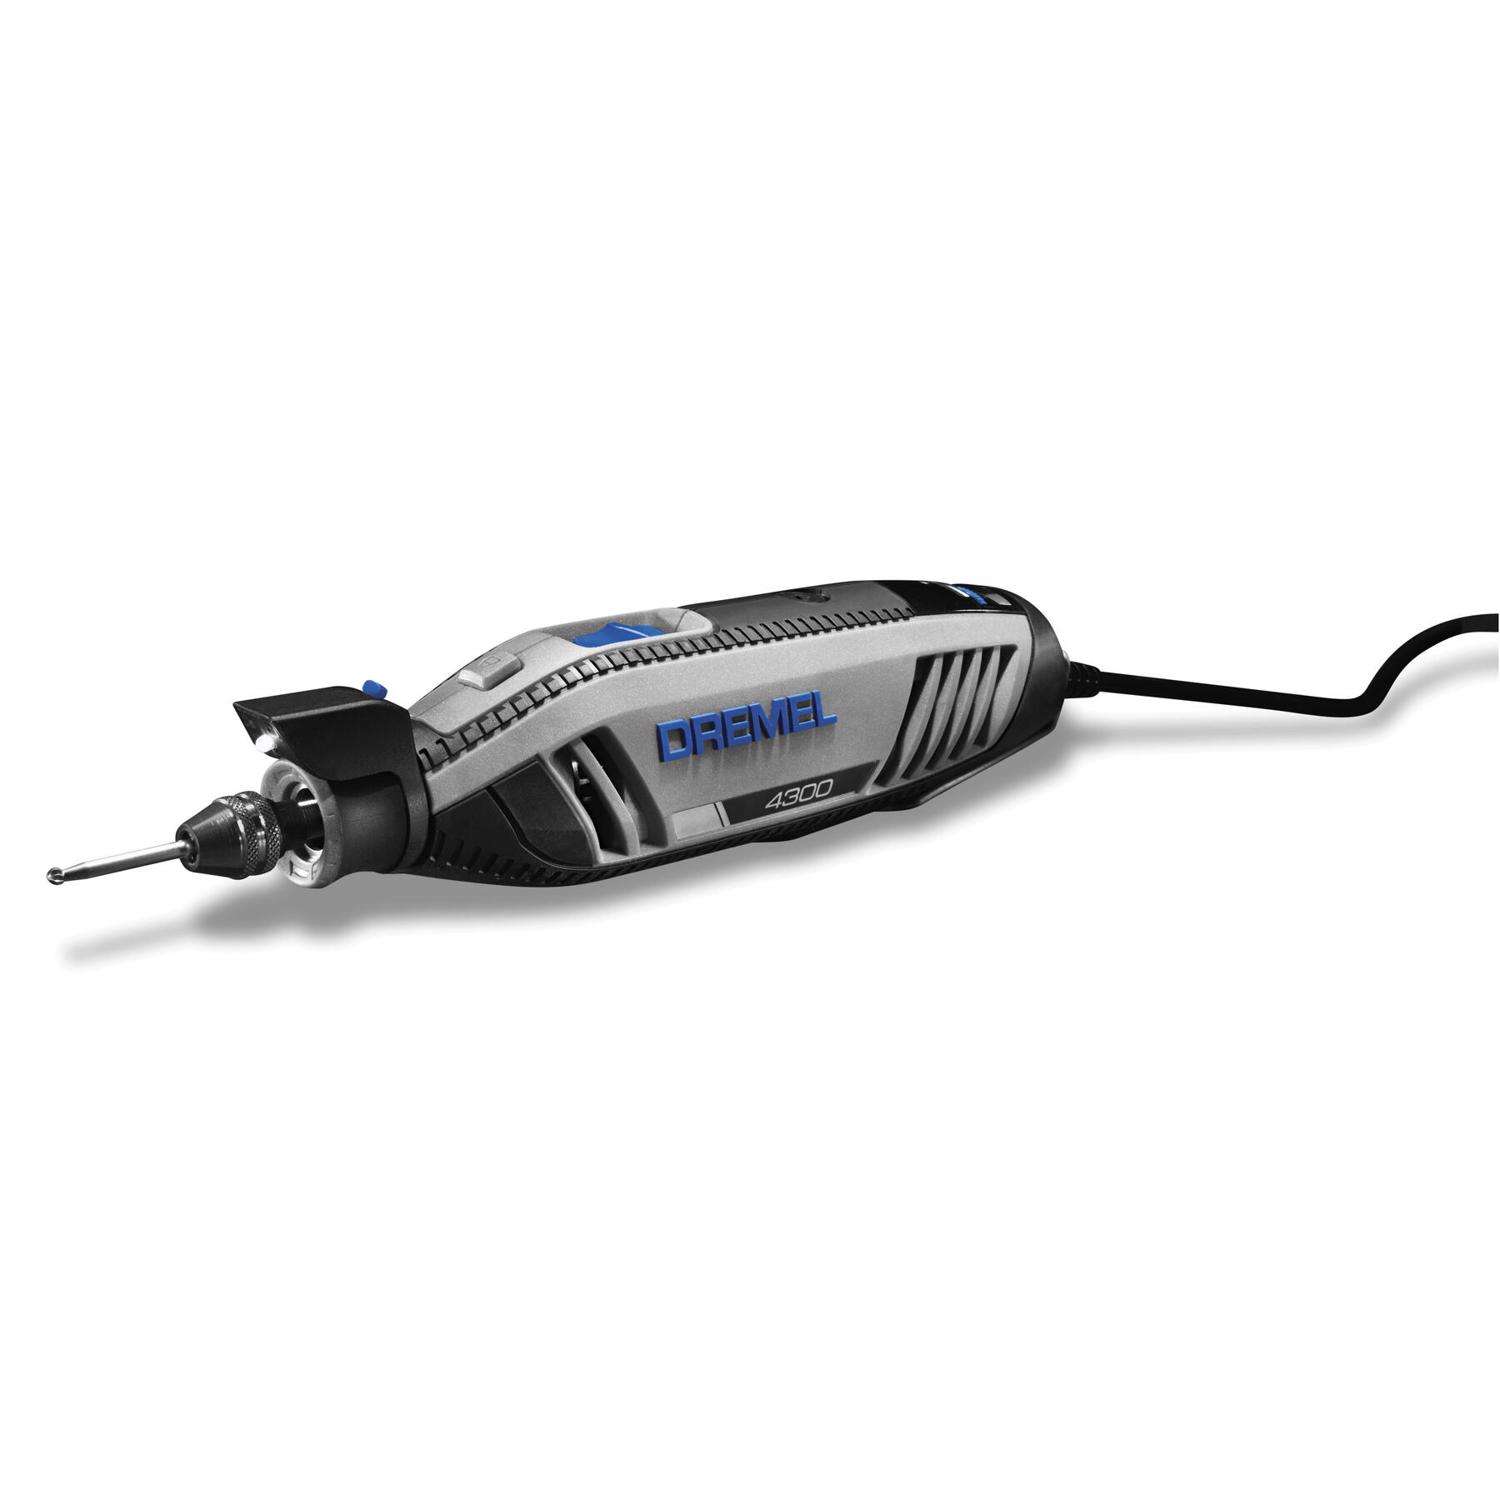 100% Effective Dremel Rotary Tool Workstation - The Owner-Builder